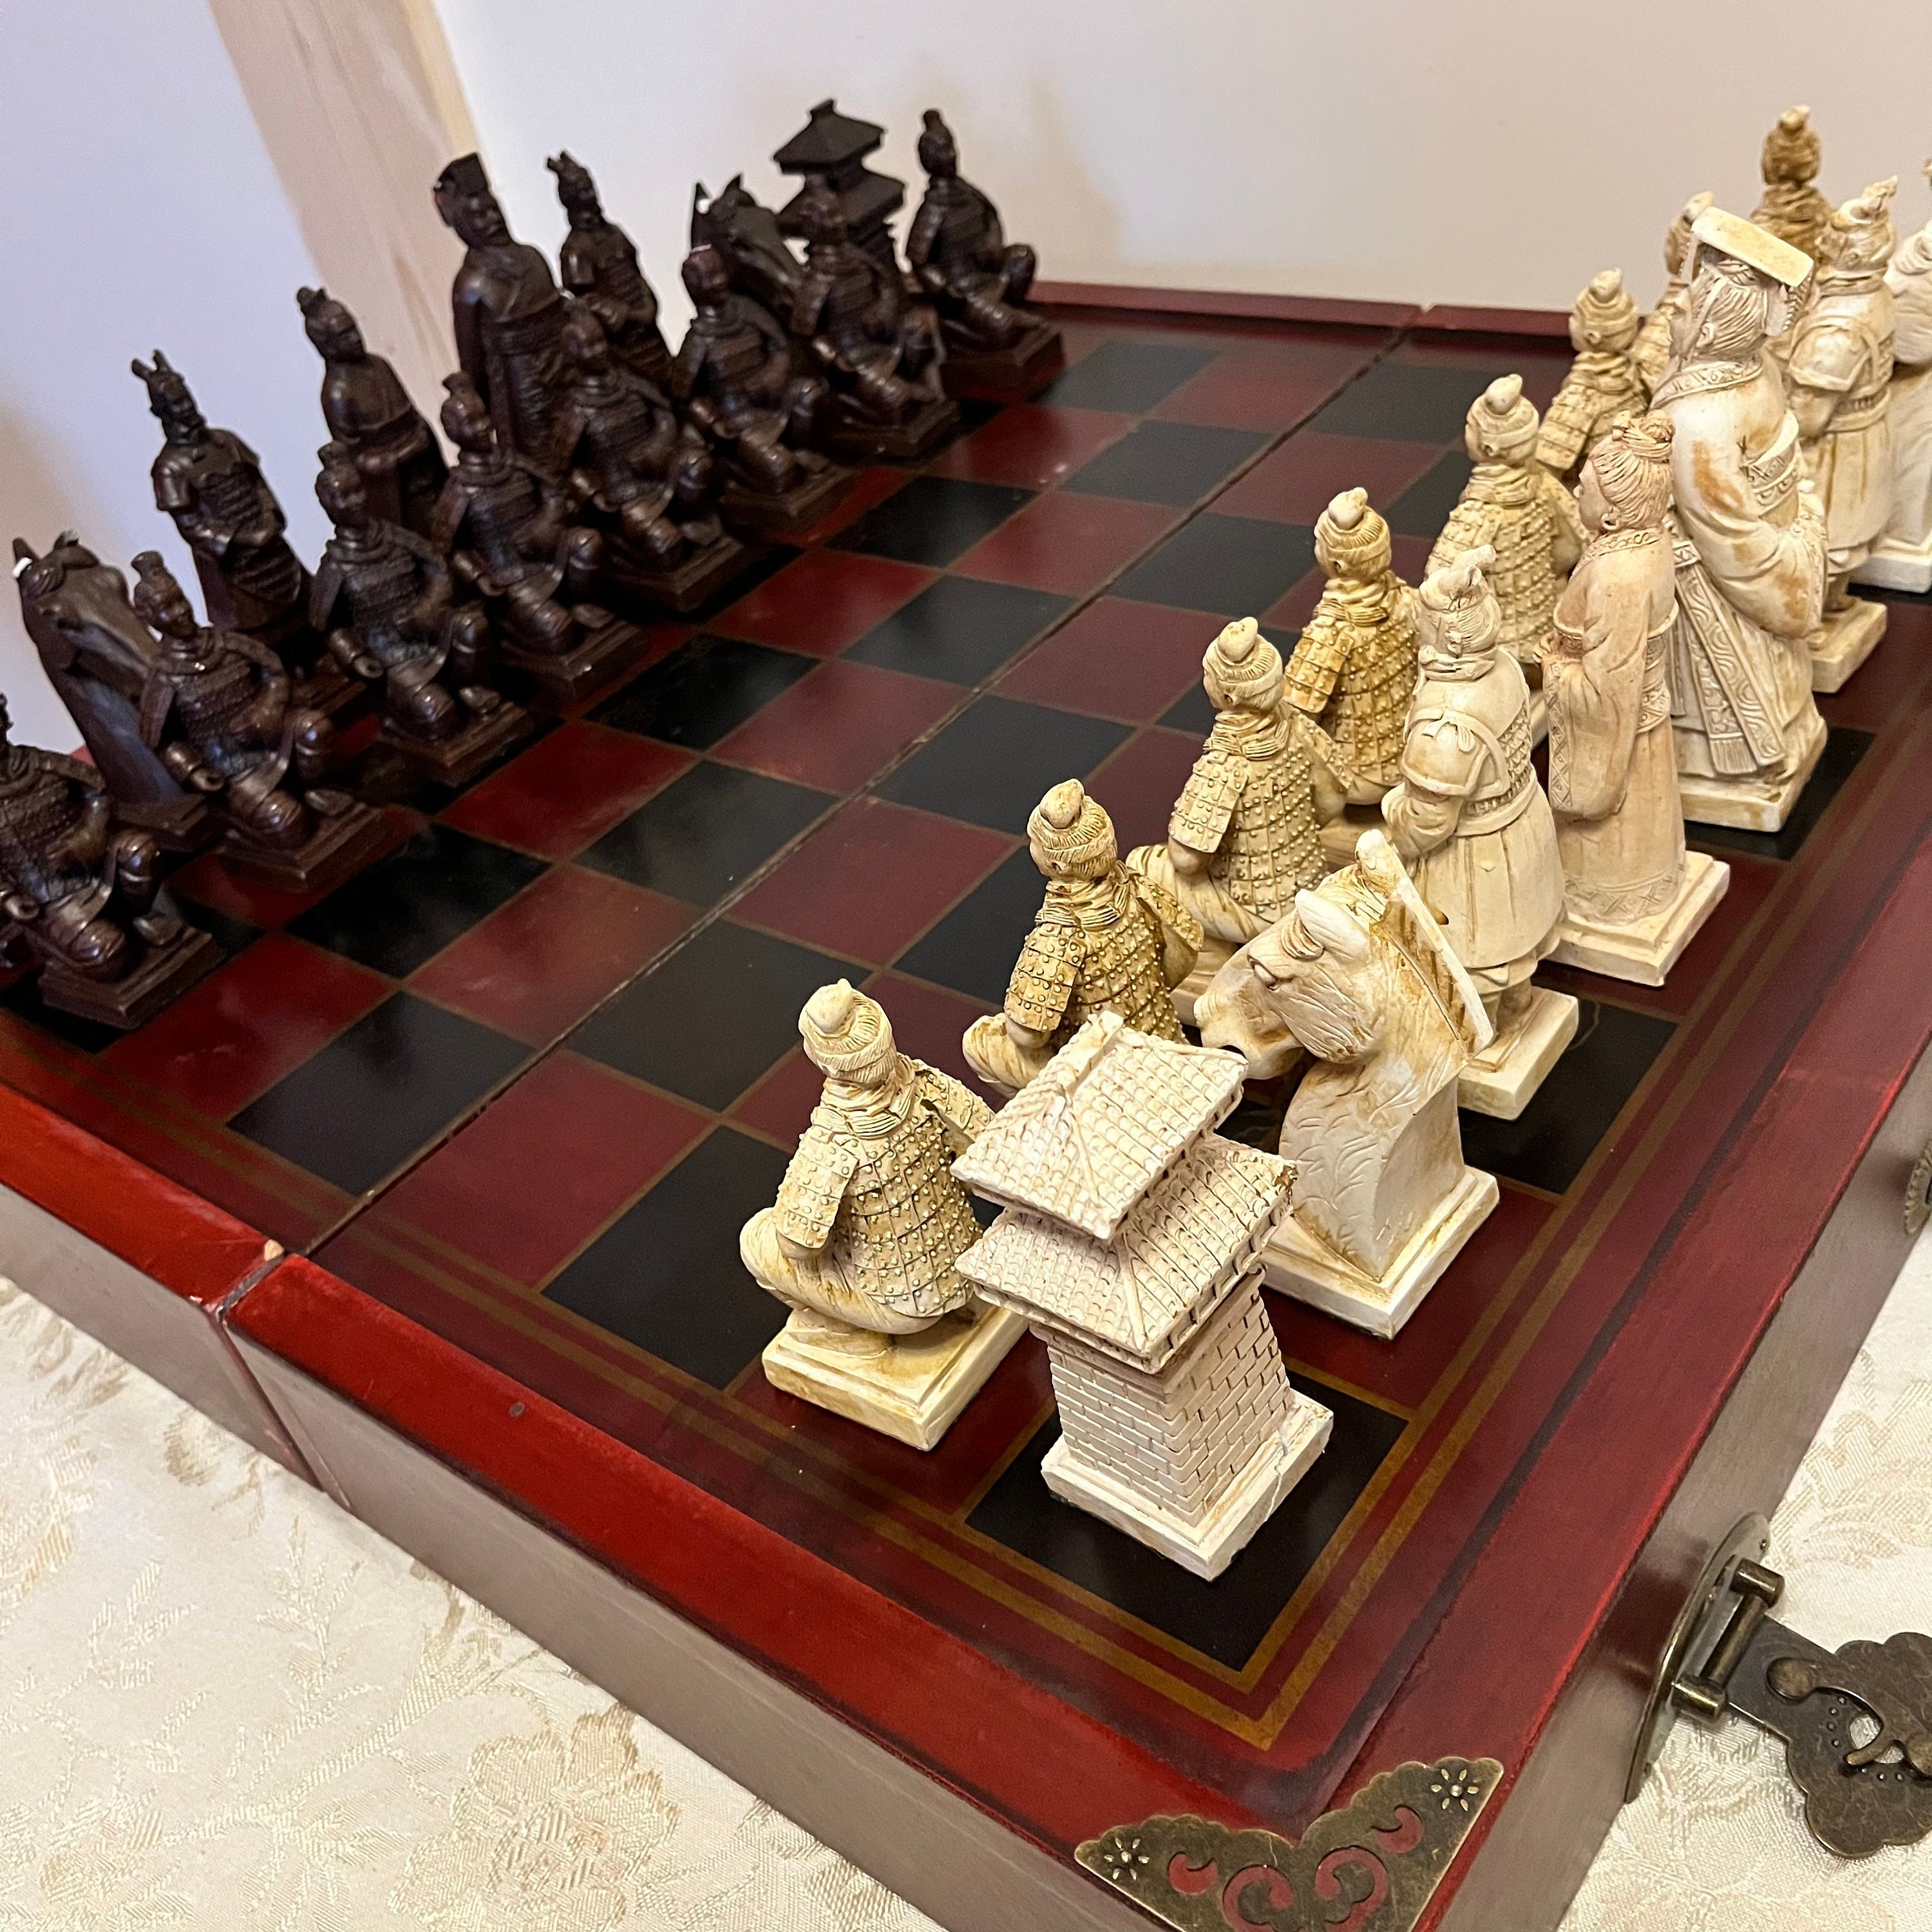 Chess Puzzle and Questions. by Teacher Chip's School Store